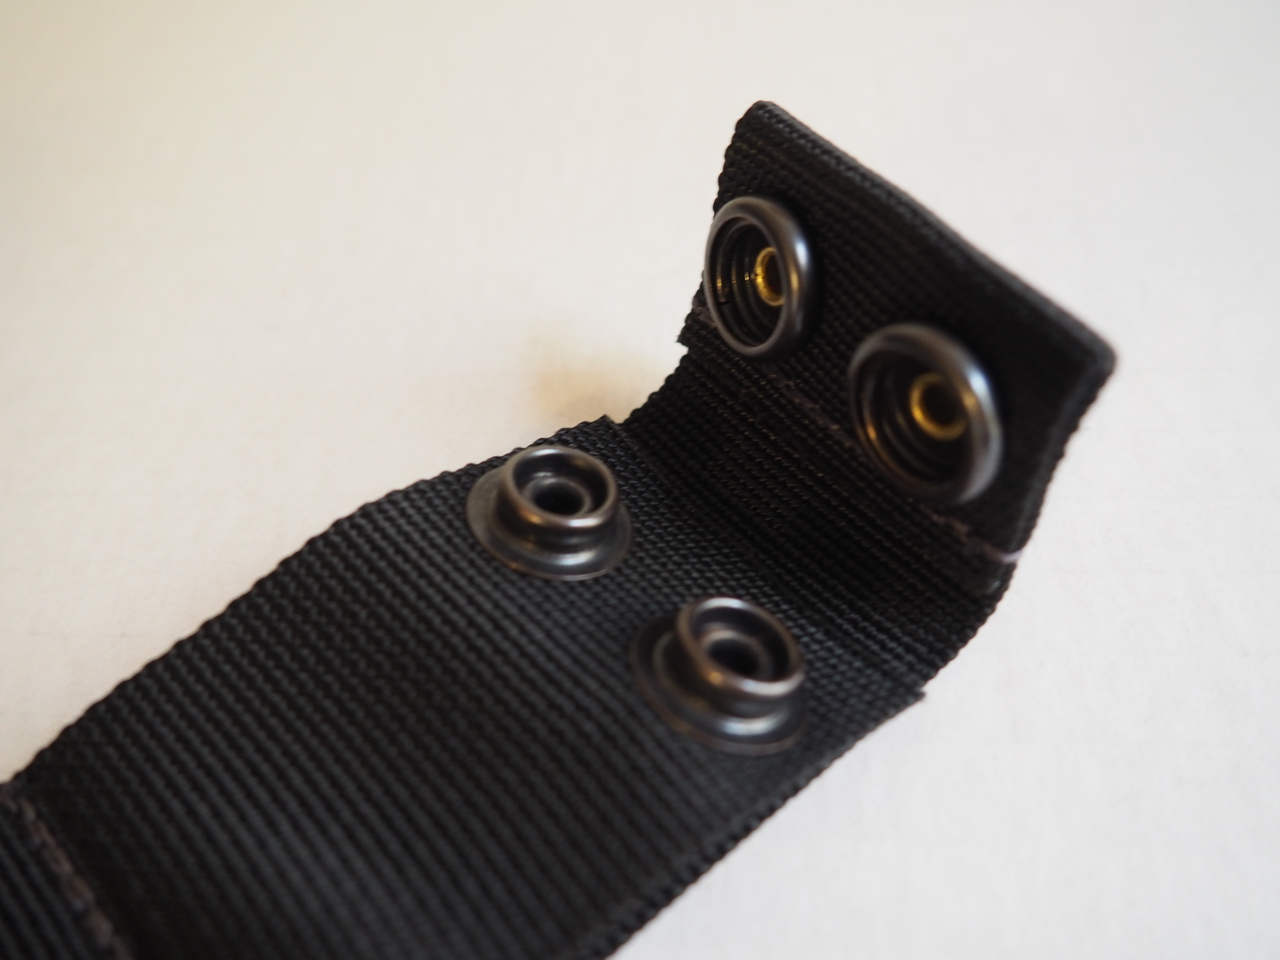 Cross strap connects to the main strap via a strong double snap closure